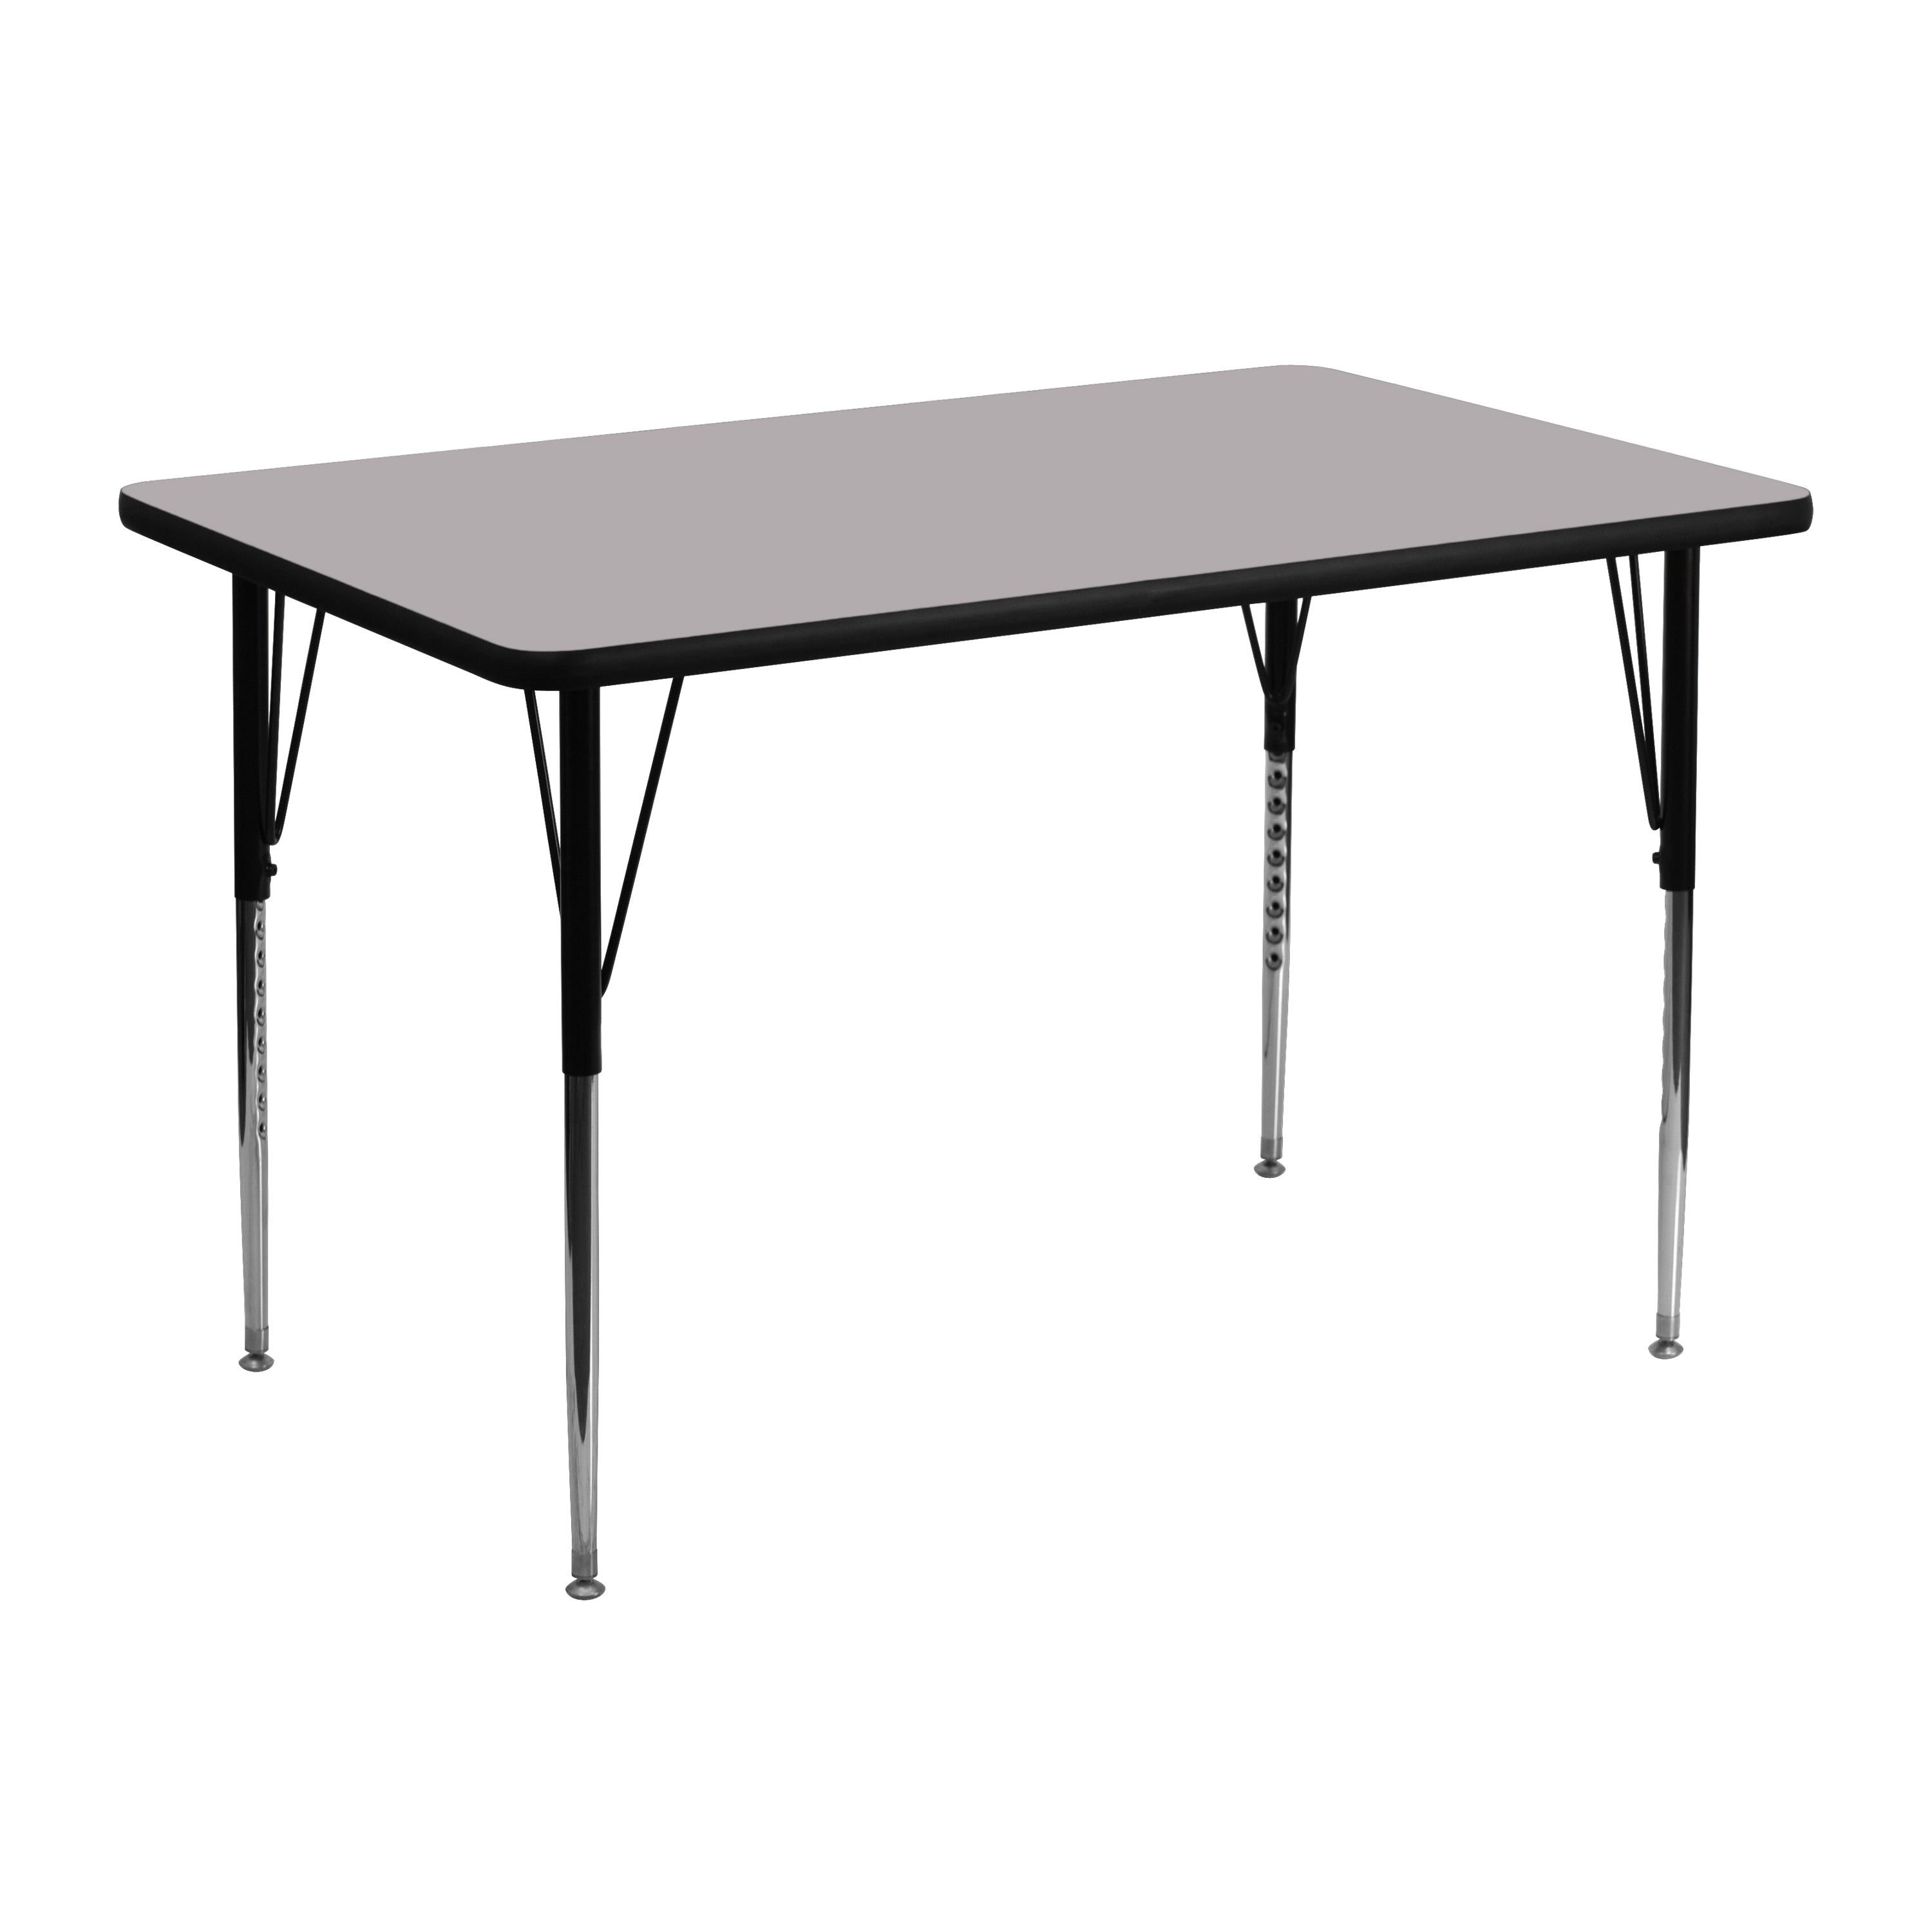 30''W x 48''L Rectangular Thermal Laminate Activity Table - Standard Height Adjustable Legs-Rectangular Activity Table-Flash Furniture-Wall2Wall Furnishings